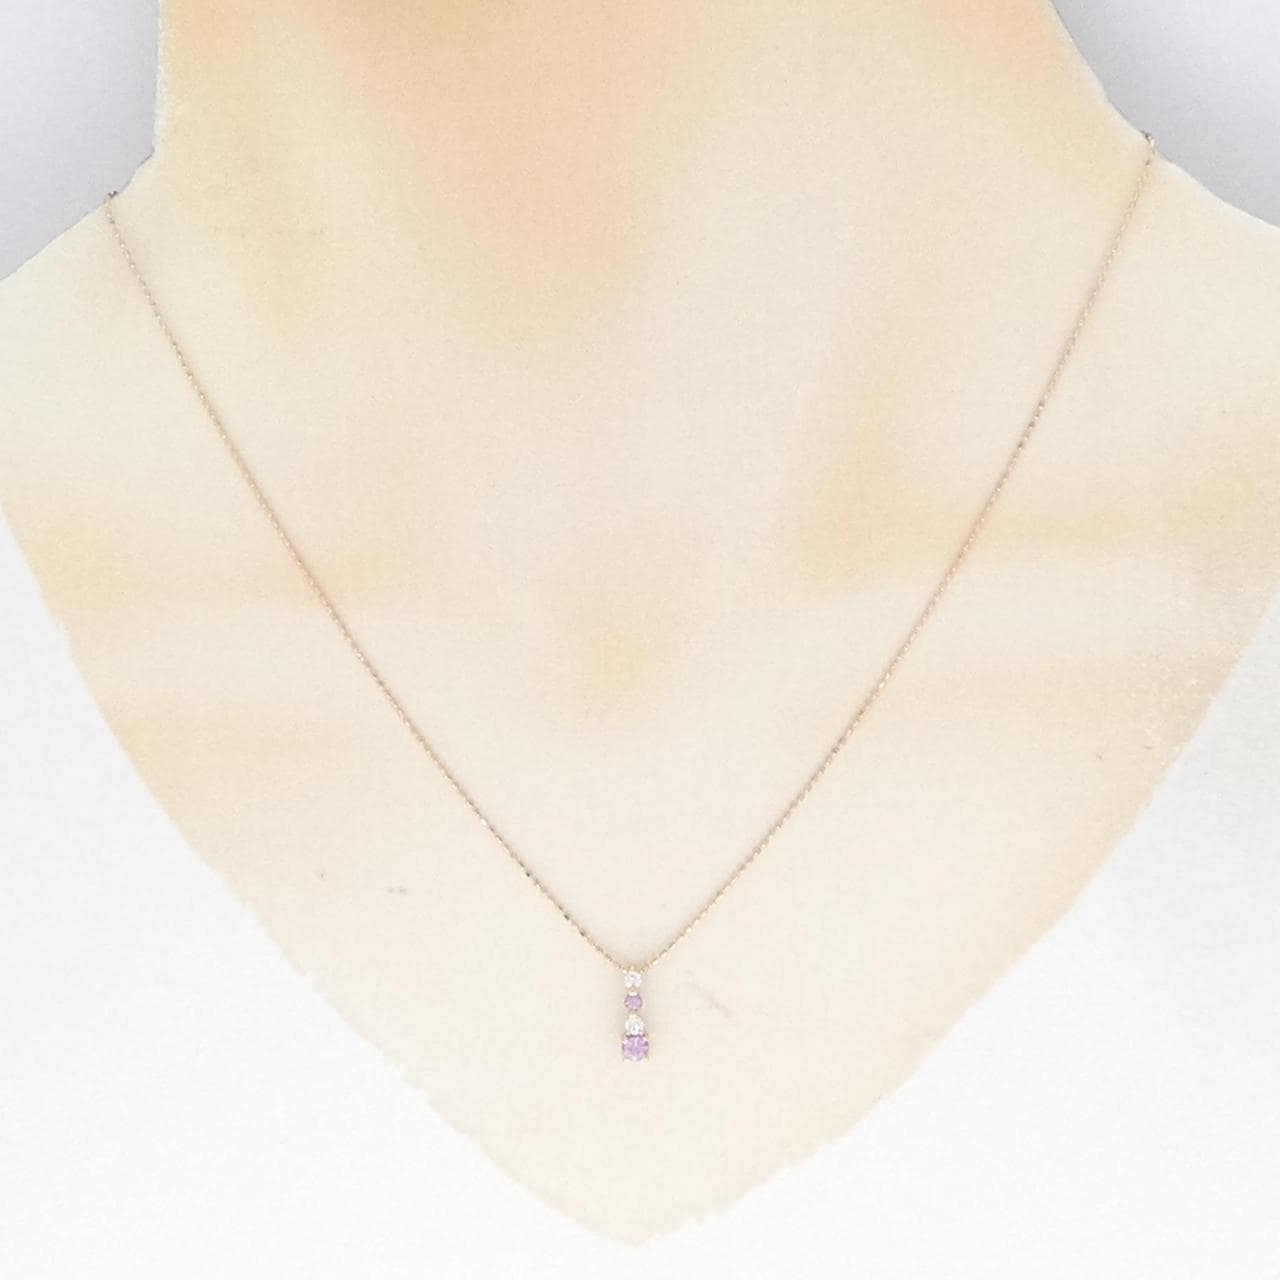 K18PG sapphire necklace diffusion treatment not tested